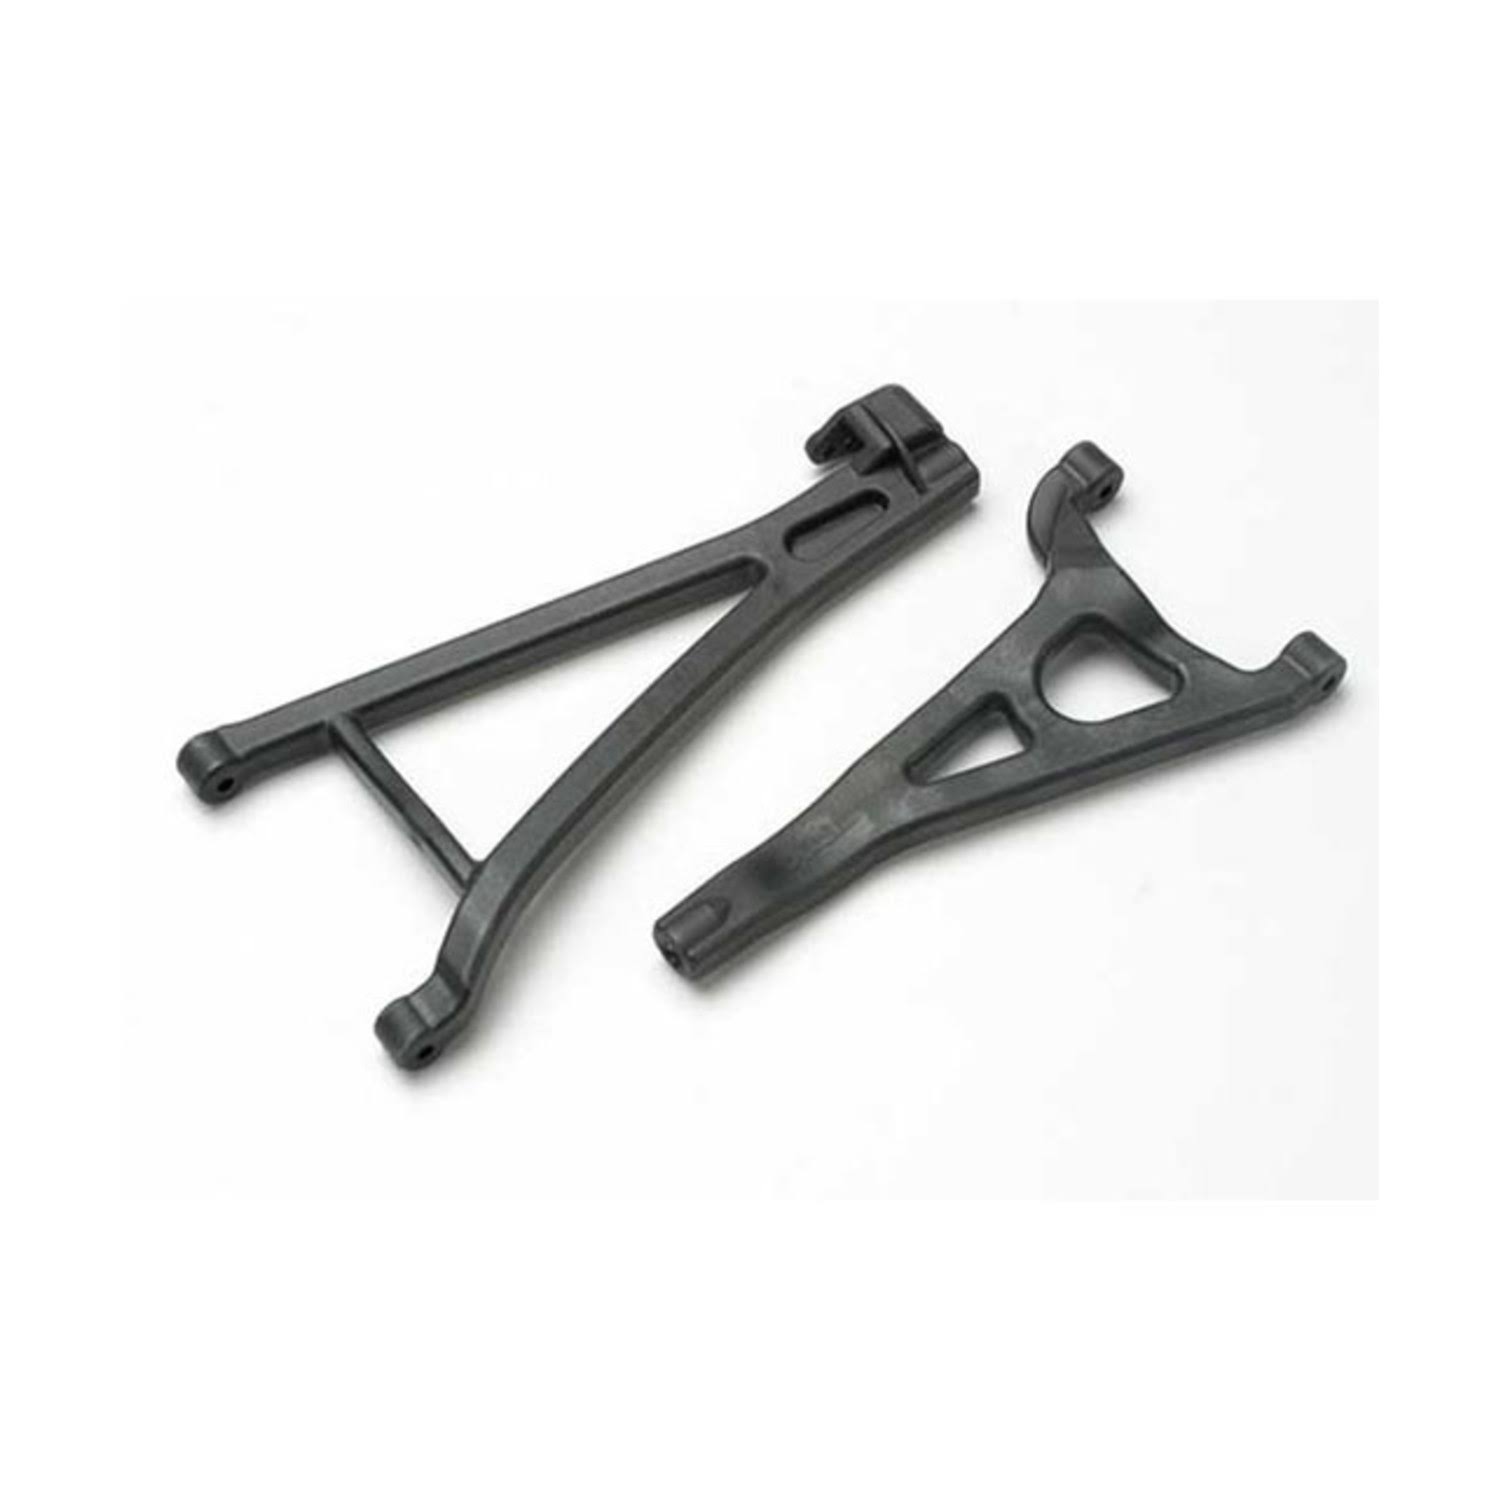 Traxxas 5332 Suspension Arms - Revo, Left Front Upper & Lower